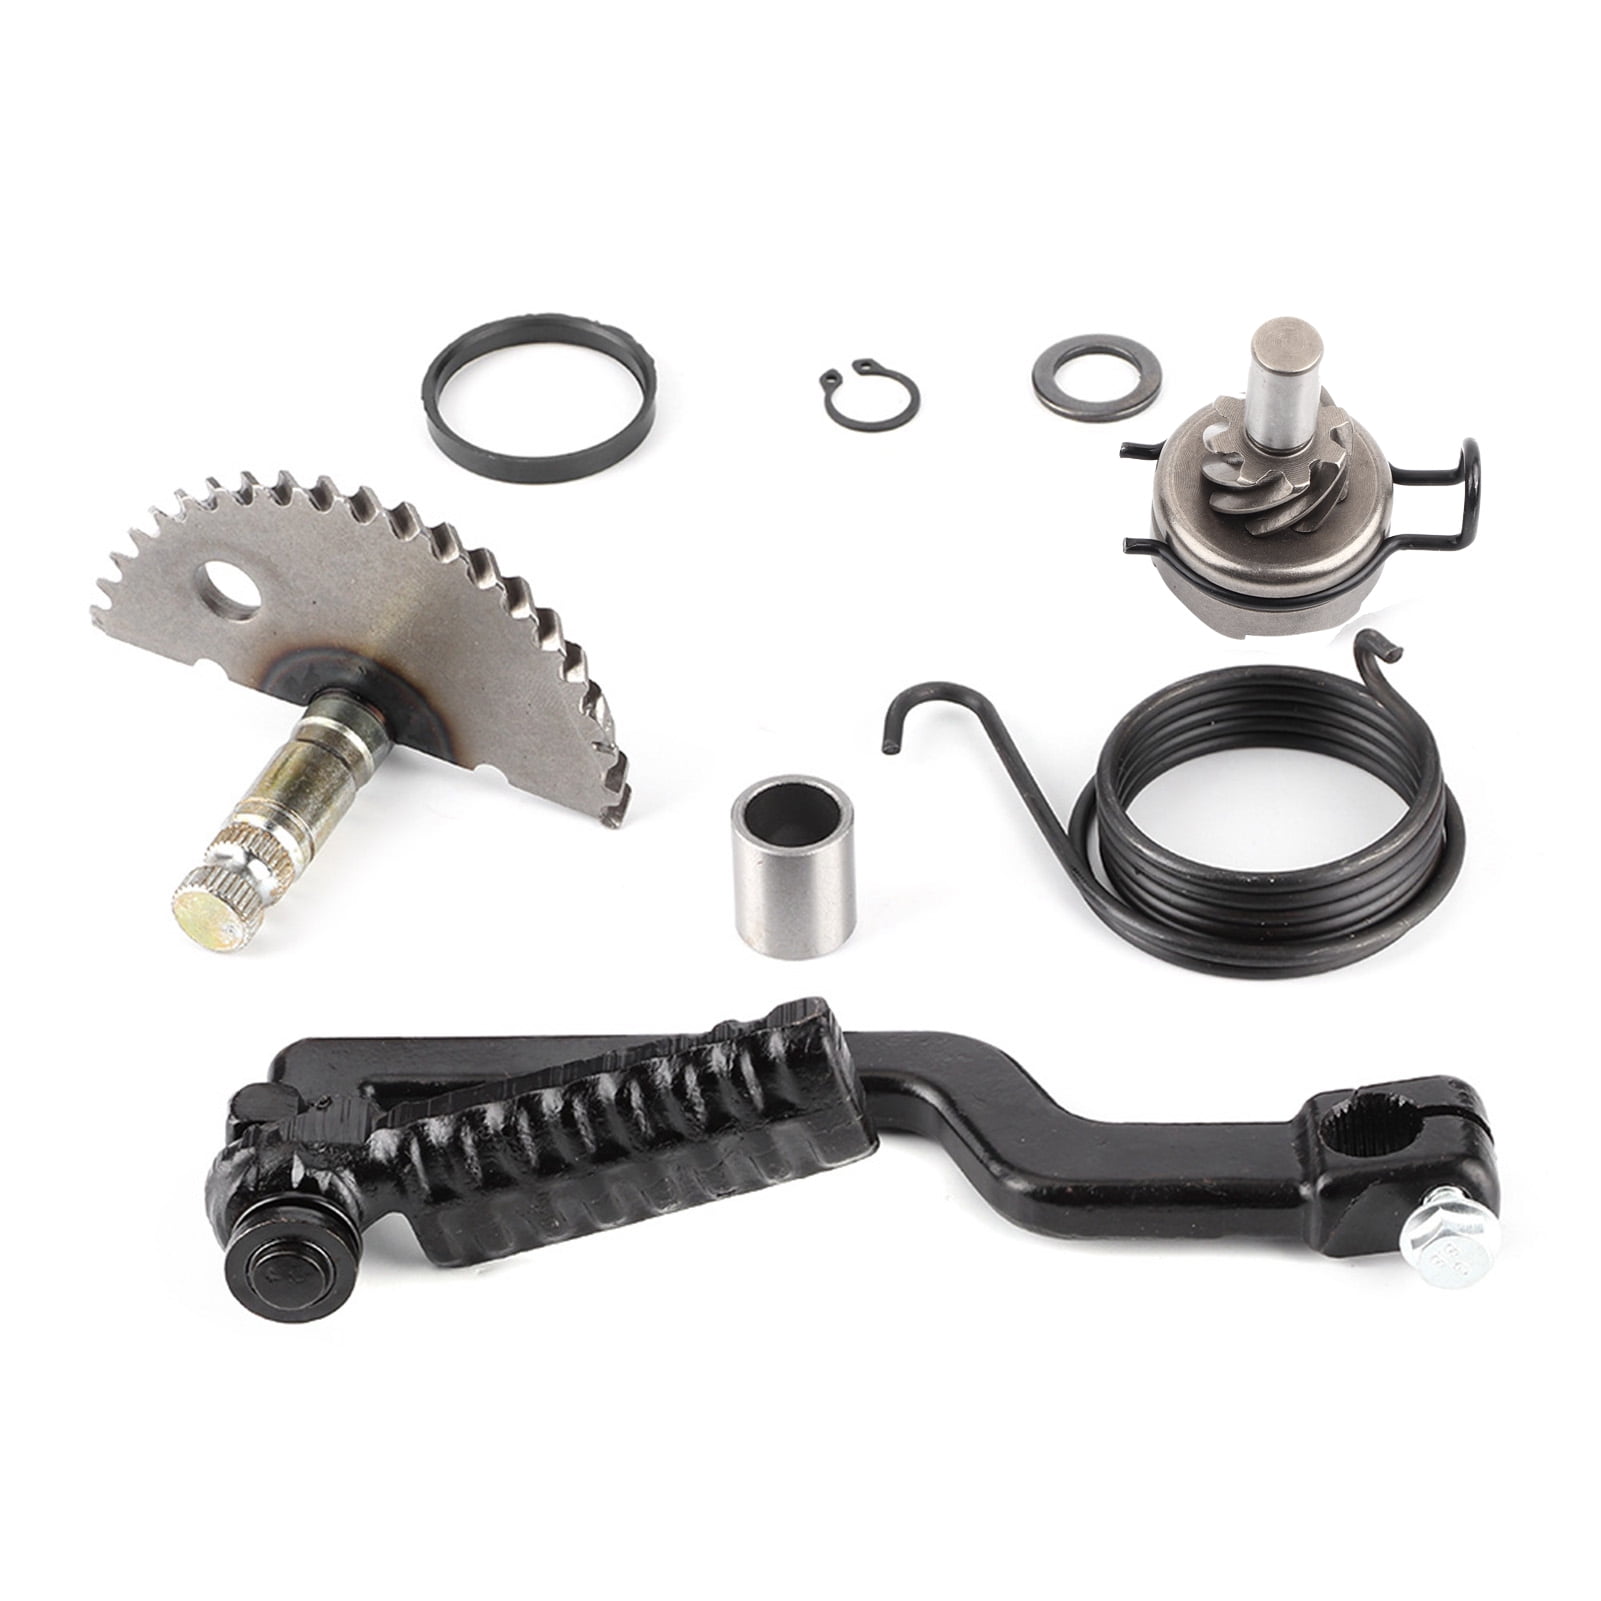 Kick Start Gear for GY6 50 80CC Motorcycle Moped Scooter Shaft Return Spring Kit 